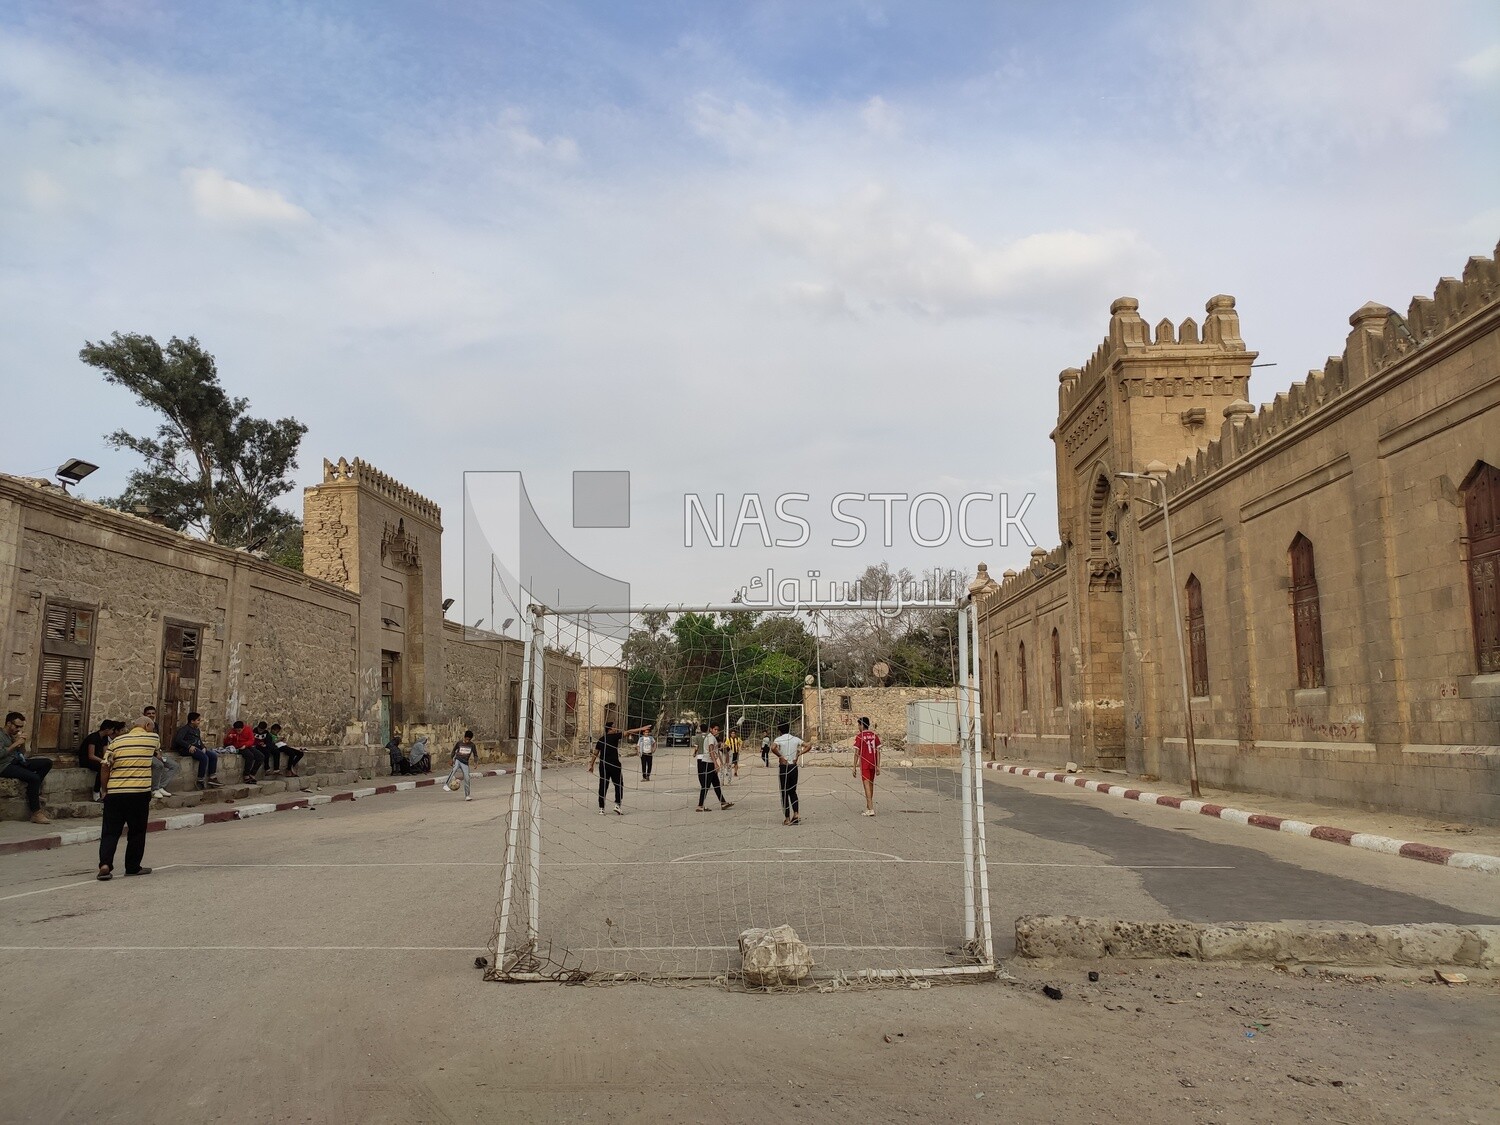 Children playing soccer in front of a tomb in a city called &quot;City of the Dead&quot; in Cairo, Egypt